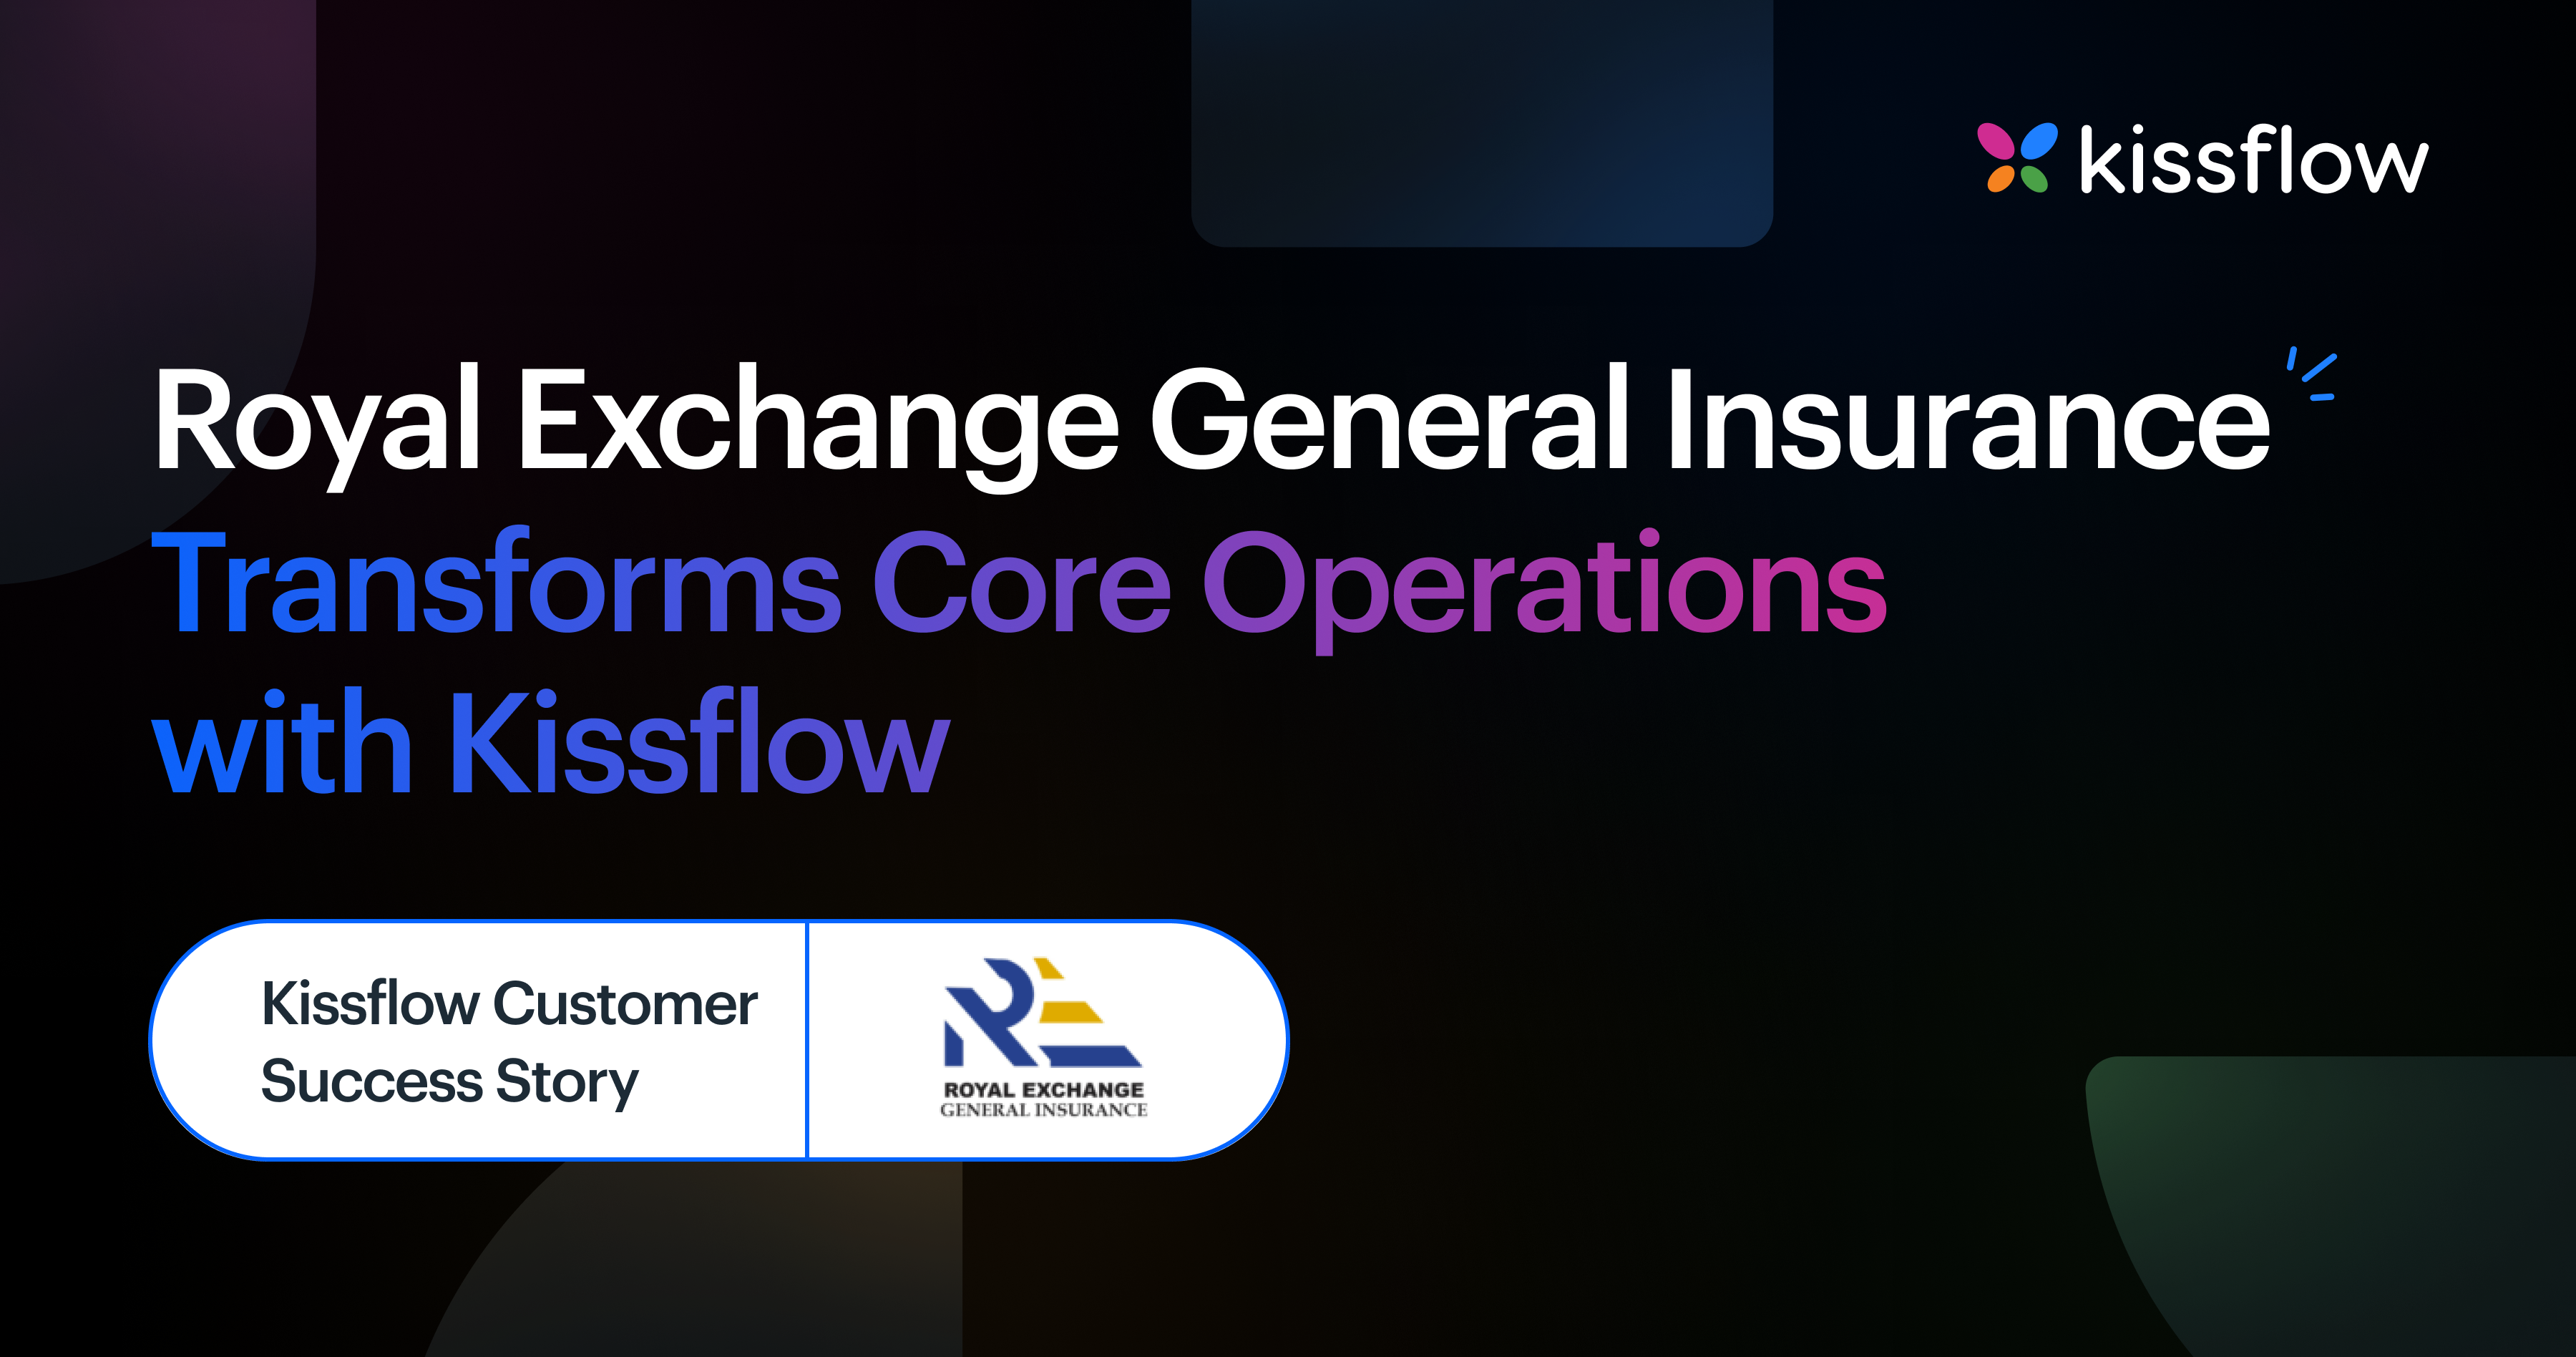 Royal Exchange General Insurance harnesses Kissflow to transform its core operations